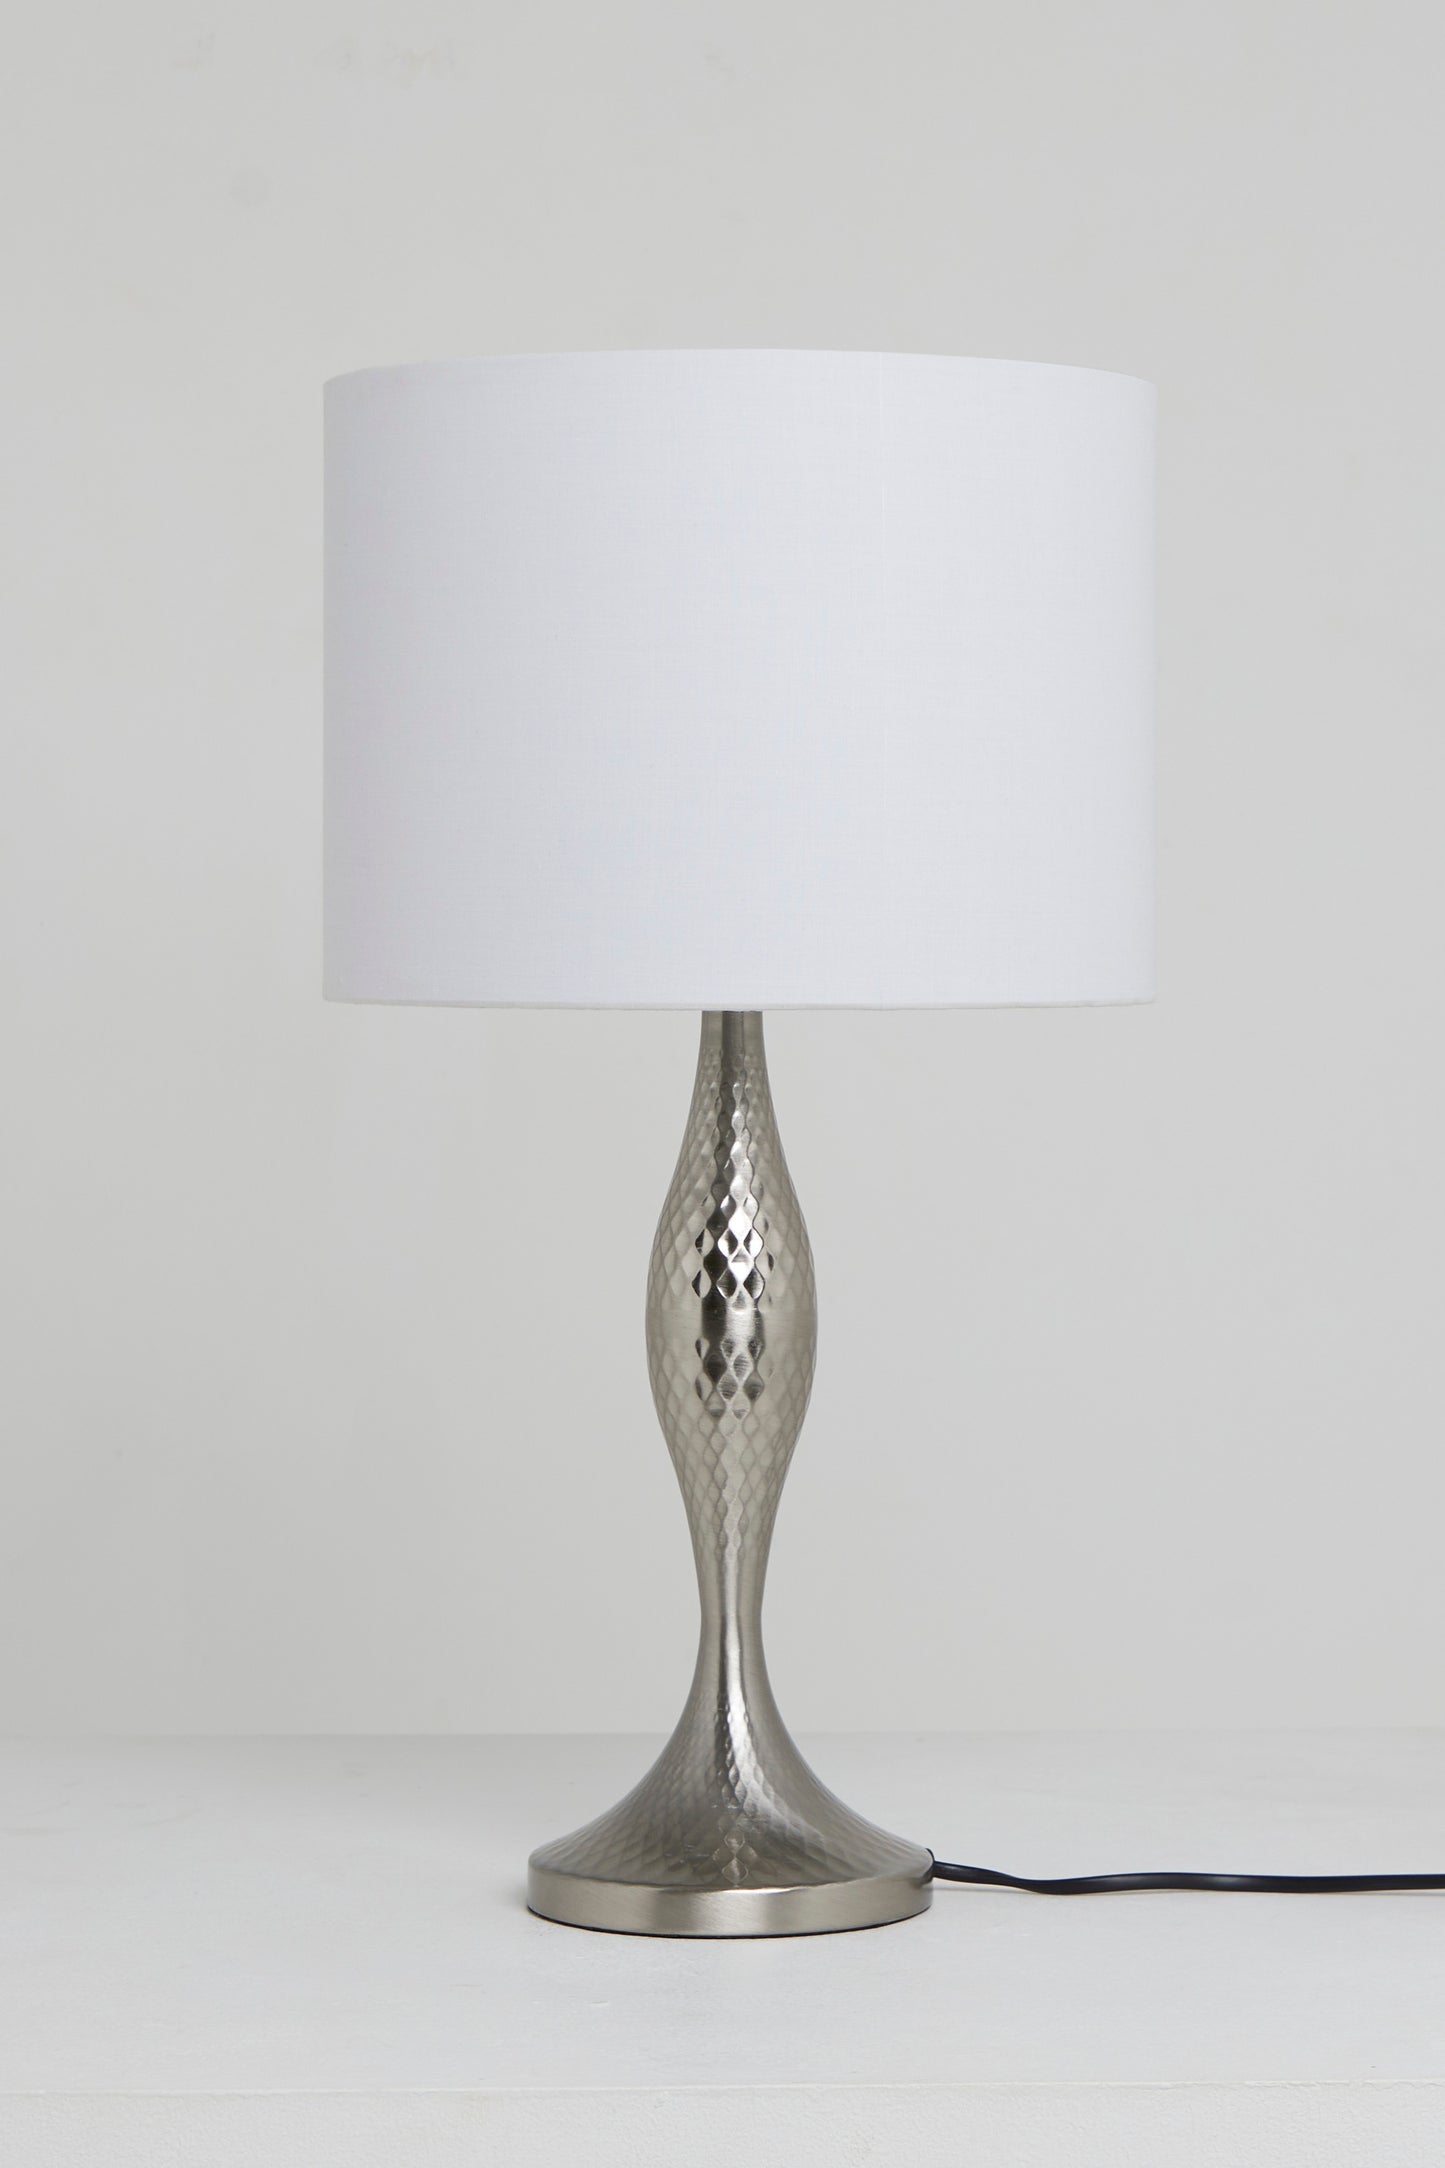 Chapel Antique Satin Nickel Table Lamp With Cream Silver Shade